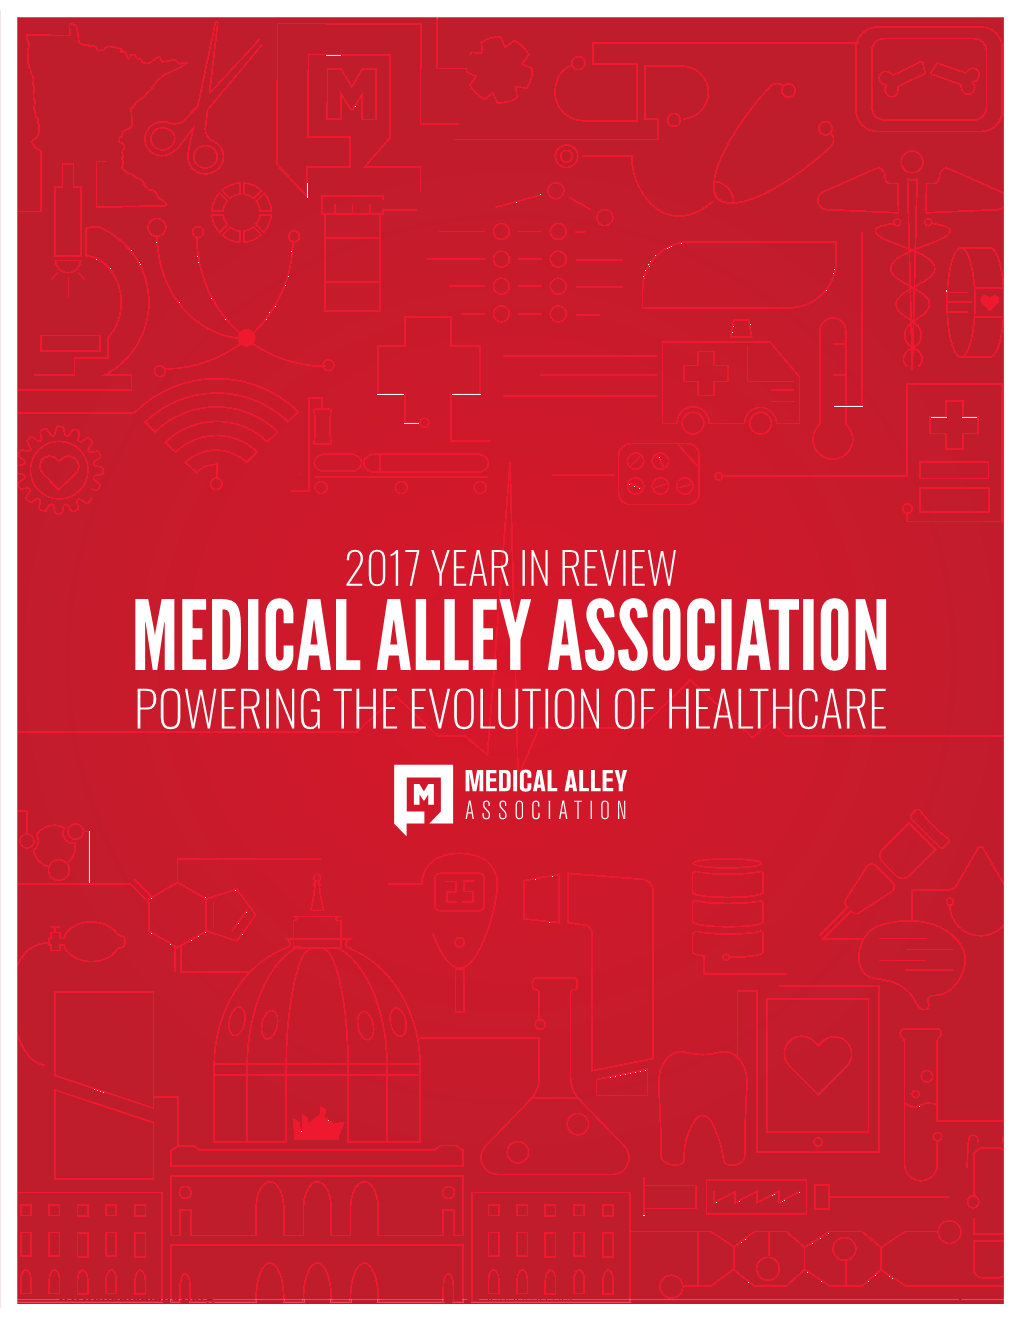 Medical Alley 2017 Year in Review